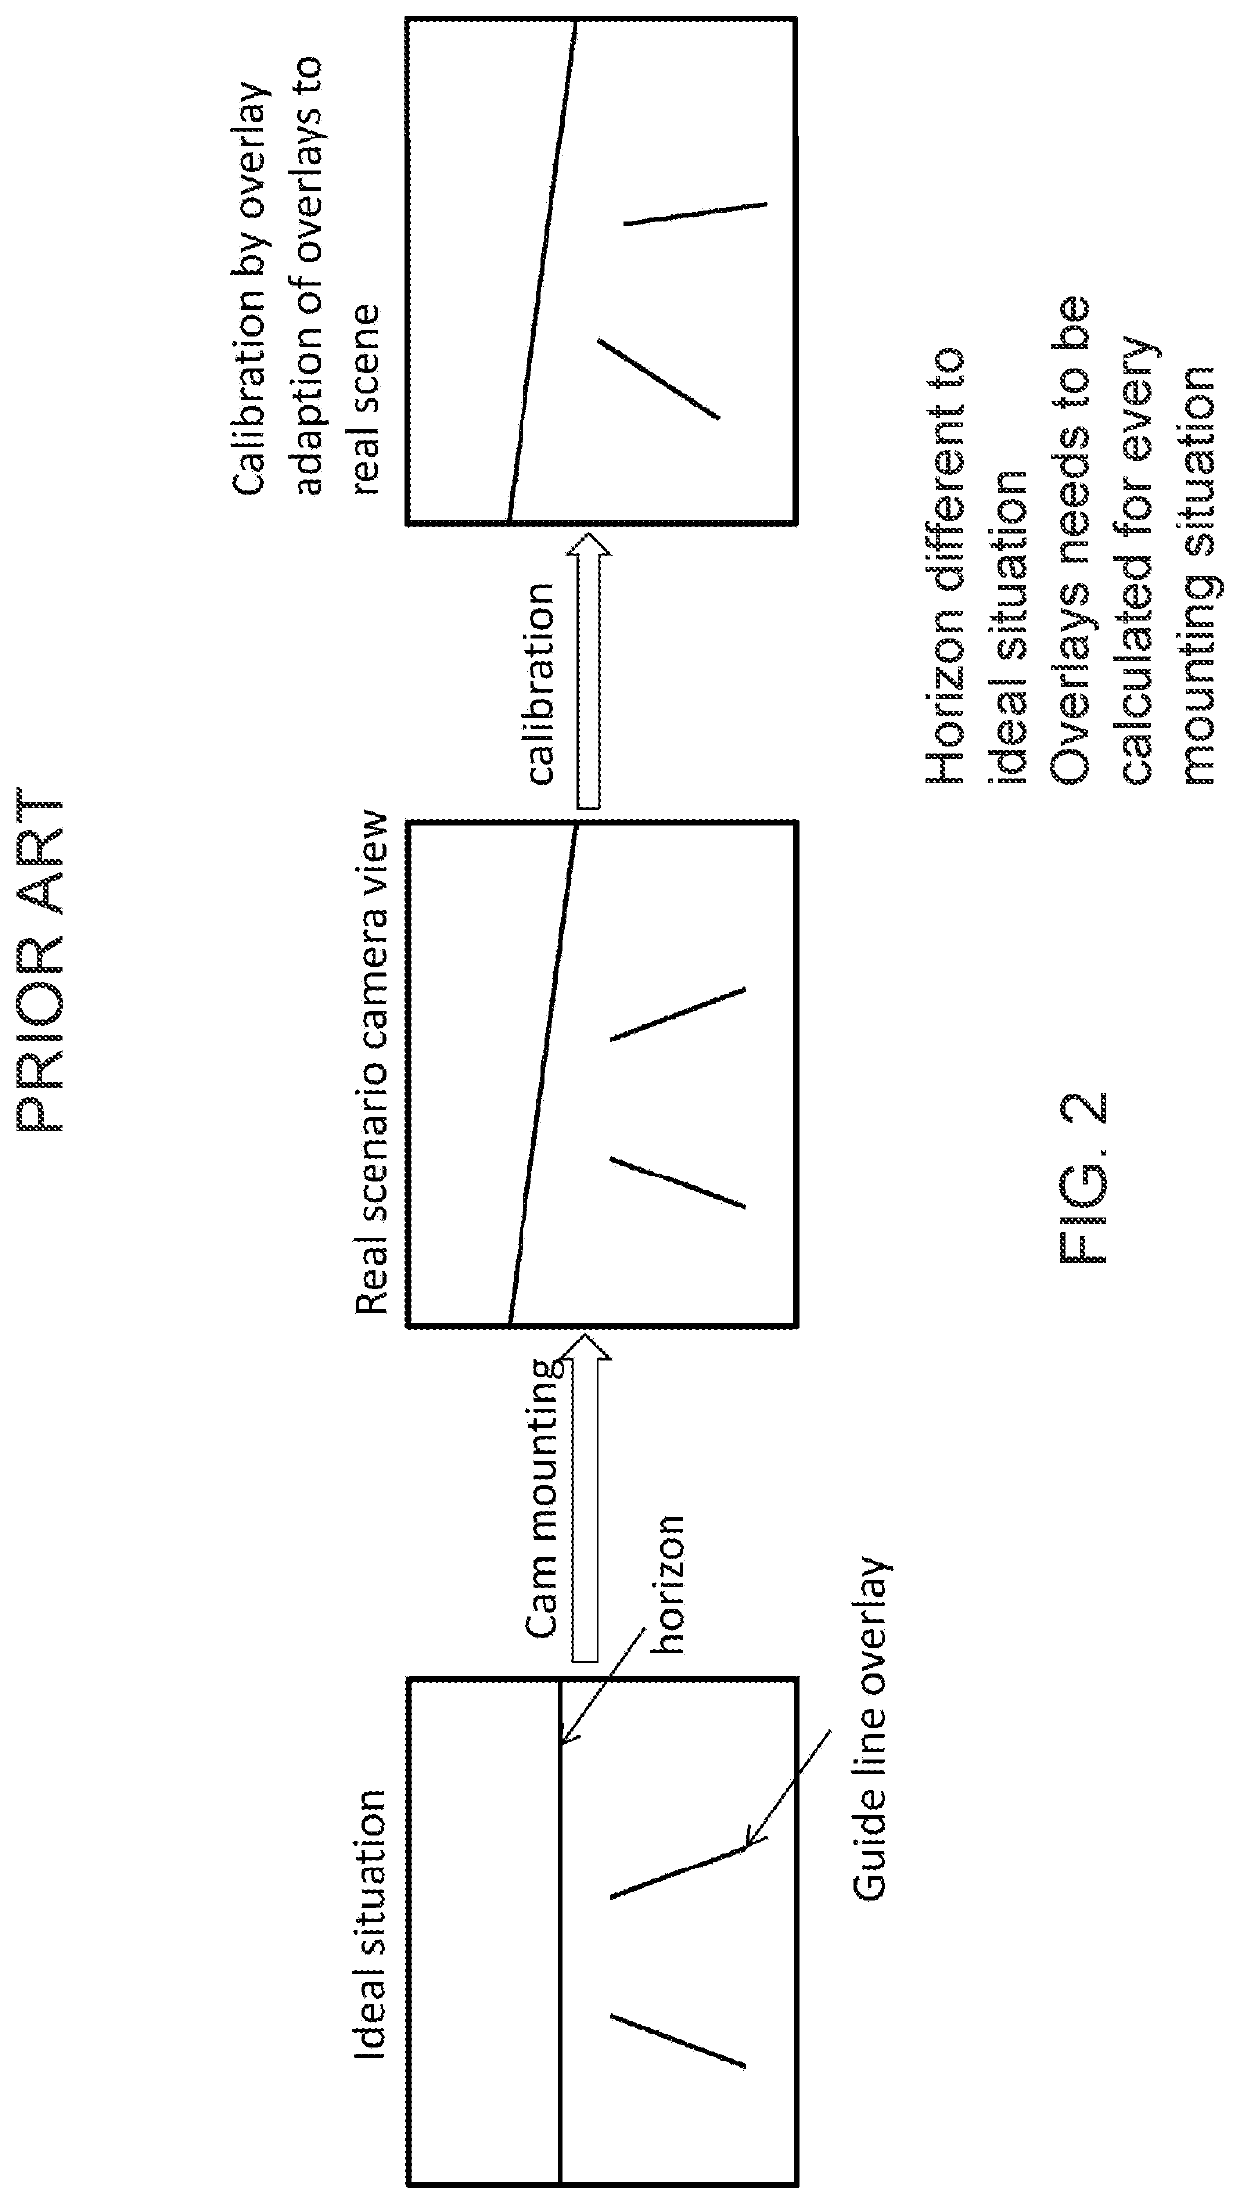 Vehicle vision system with overlay calibration